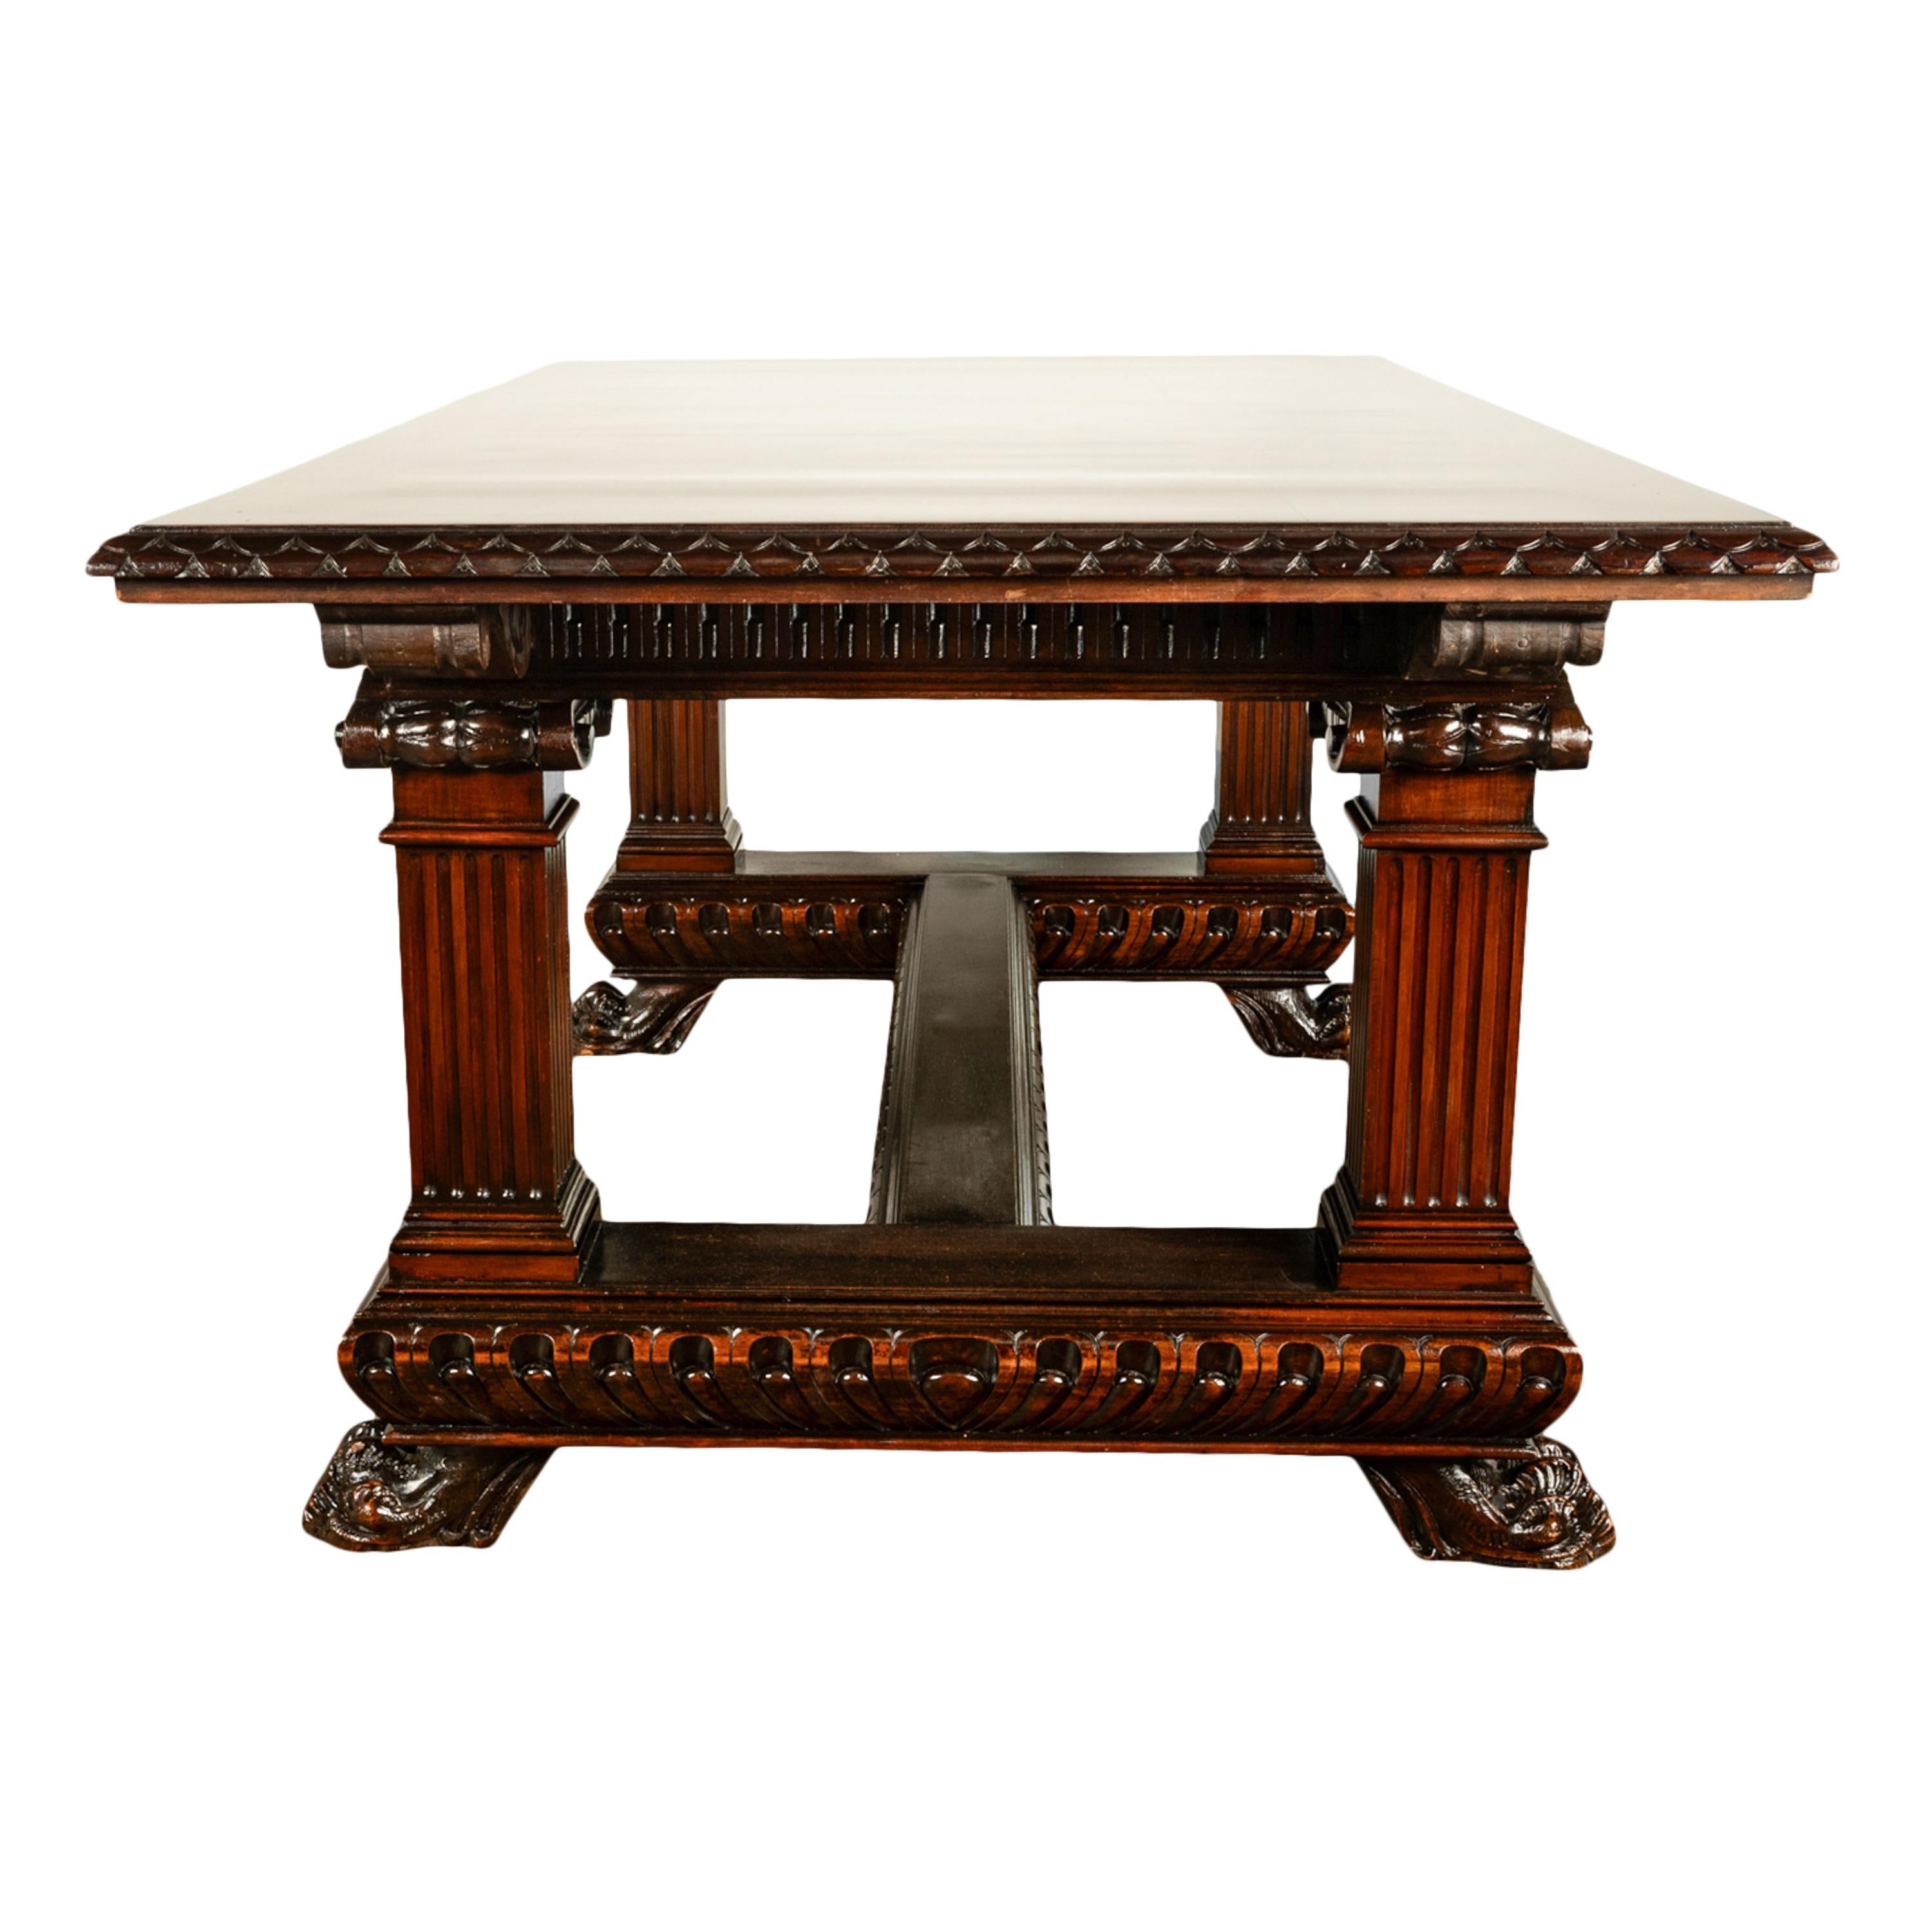 Antique Italian Carved Renaissance Revival Walnut Library Dining Table 1880 For Sale 4